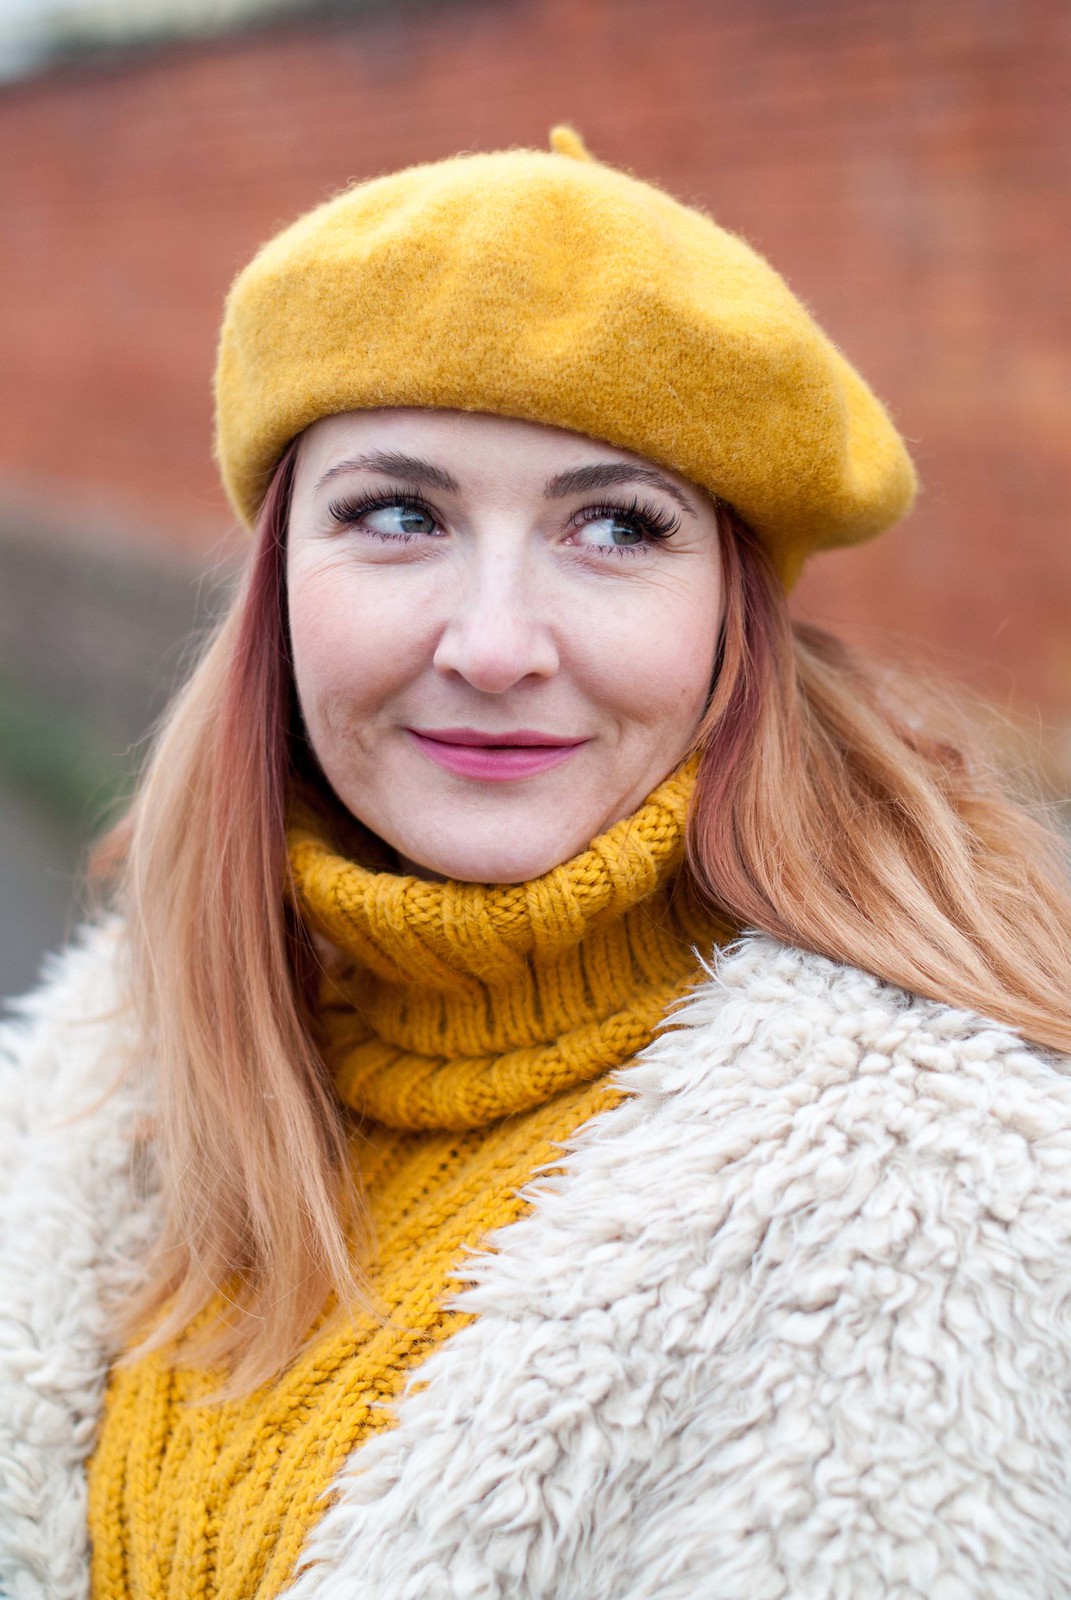 A Shearling Gilet Instead of a Winter Coat, Over 40 Style: Faux shearling gilet, yellow chunky sweater, skinny jeans, ankle boots and beret | Not Dressed As Lamb, Over 40 Style: Faux shearling gilet, yellow chunky sweater, skinny jeans, ankle boots and beret | Not Dressed As Lamb